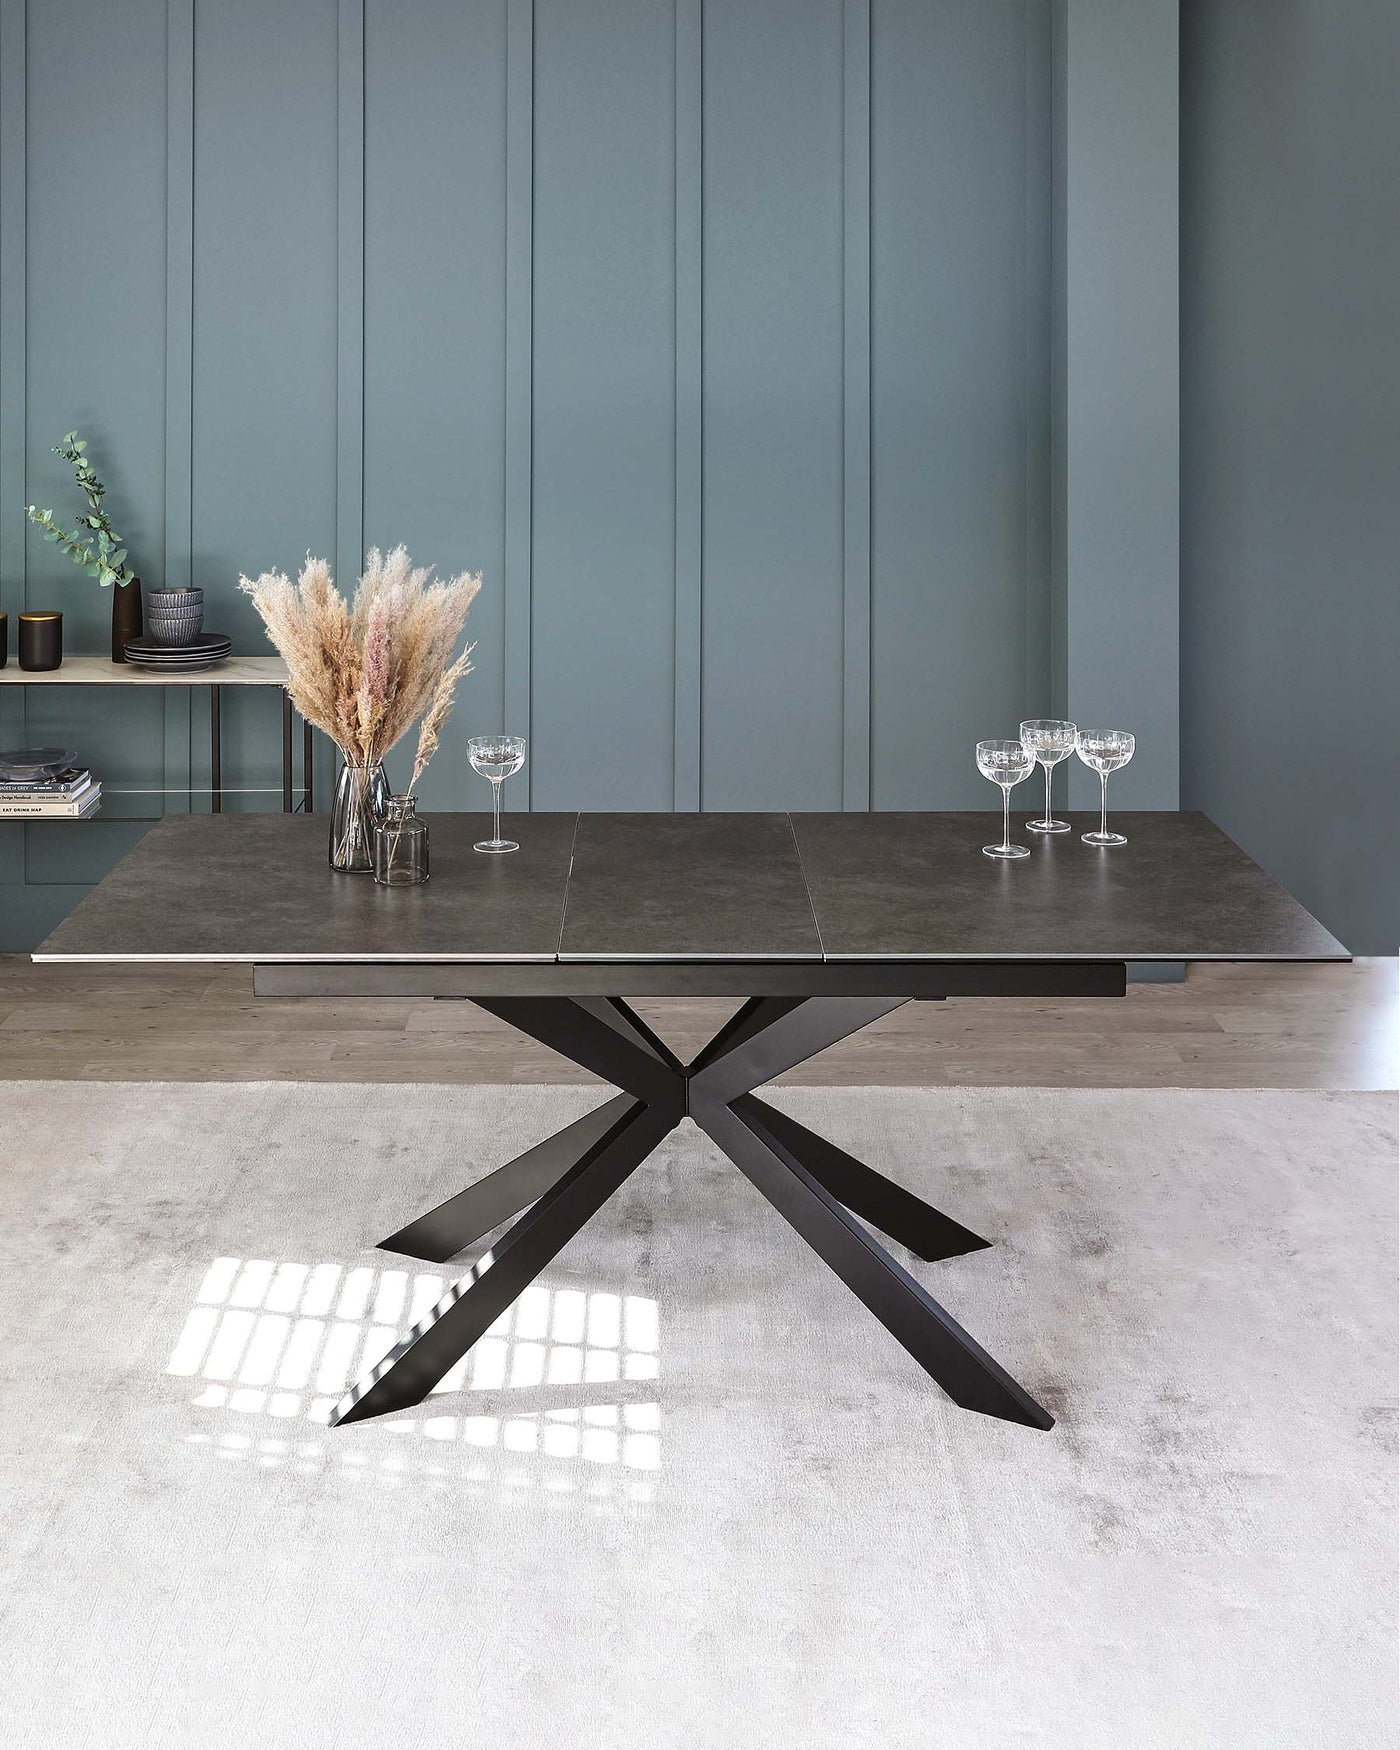 Modern minimalist dining table with a dark, stone-like tabletop and a striking X-shaped metallic base, contrasted against a muted teal wall and light grey floor.